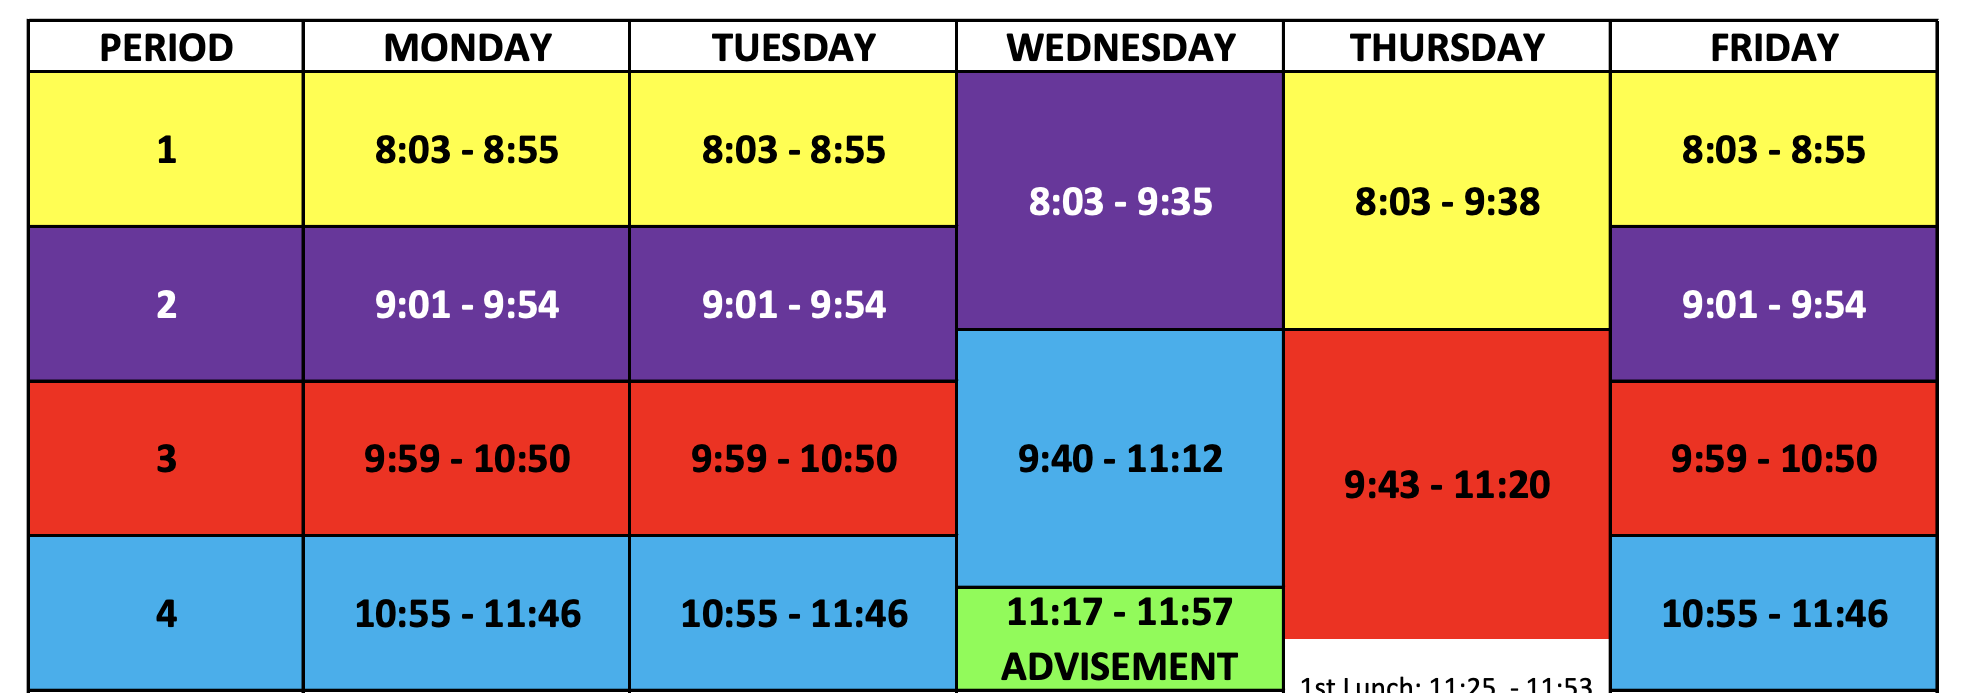 Considerations for a High School Hybrid Bell Schedule for Band and Fine Arts